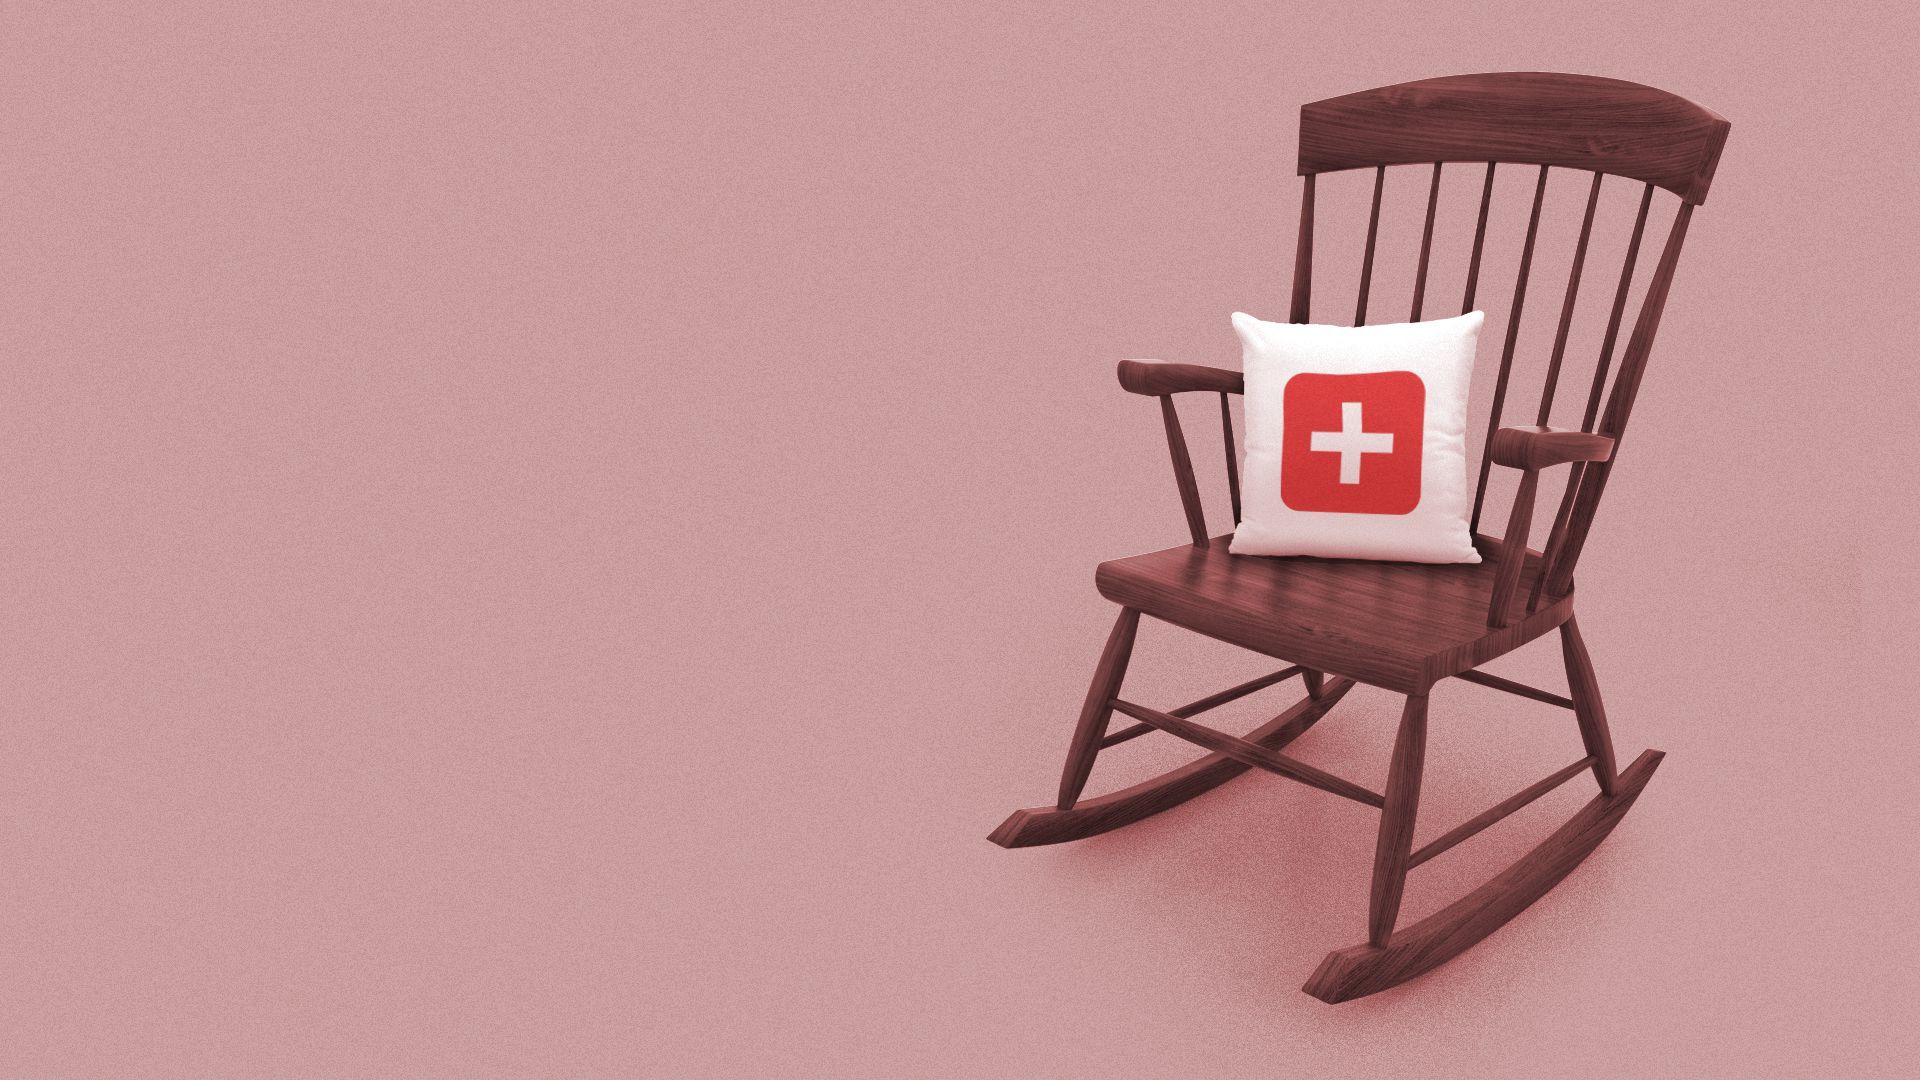 Illustration of a pillow with a health plus on a rocking chair.